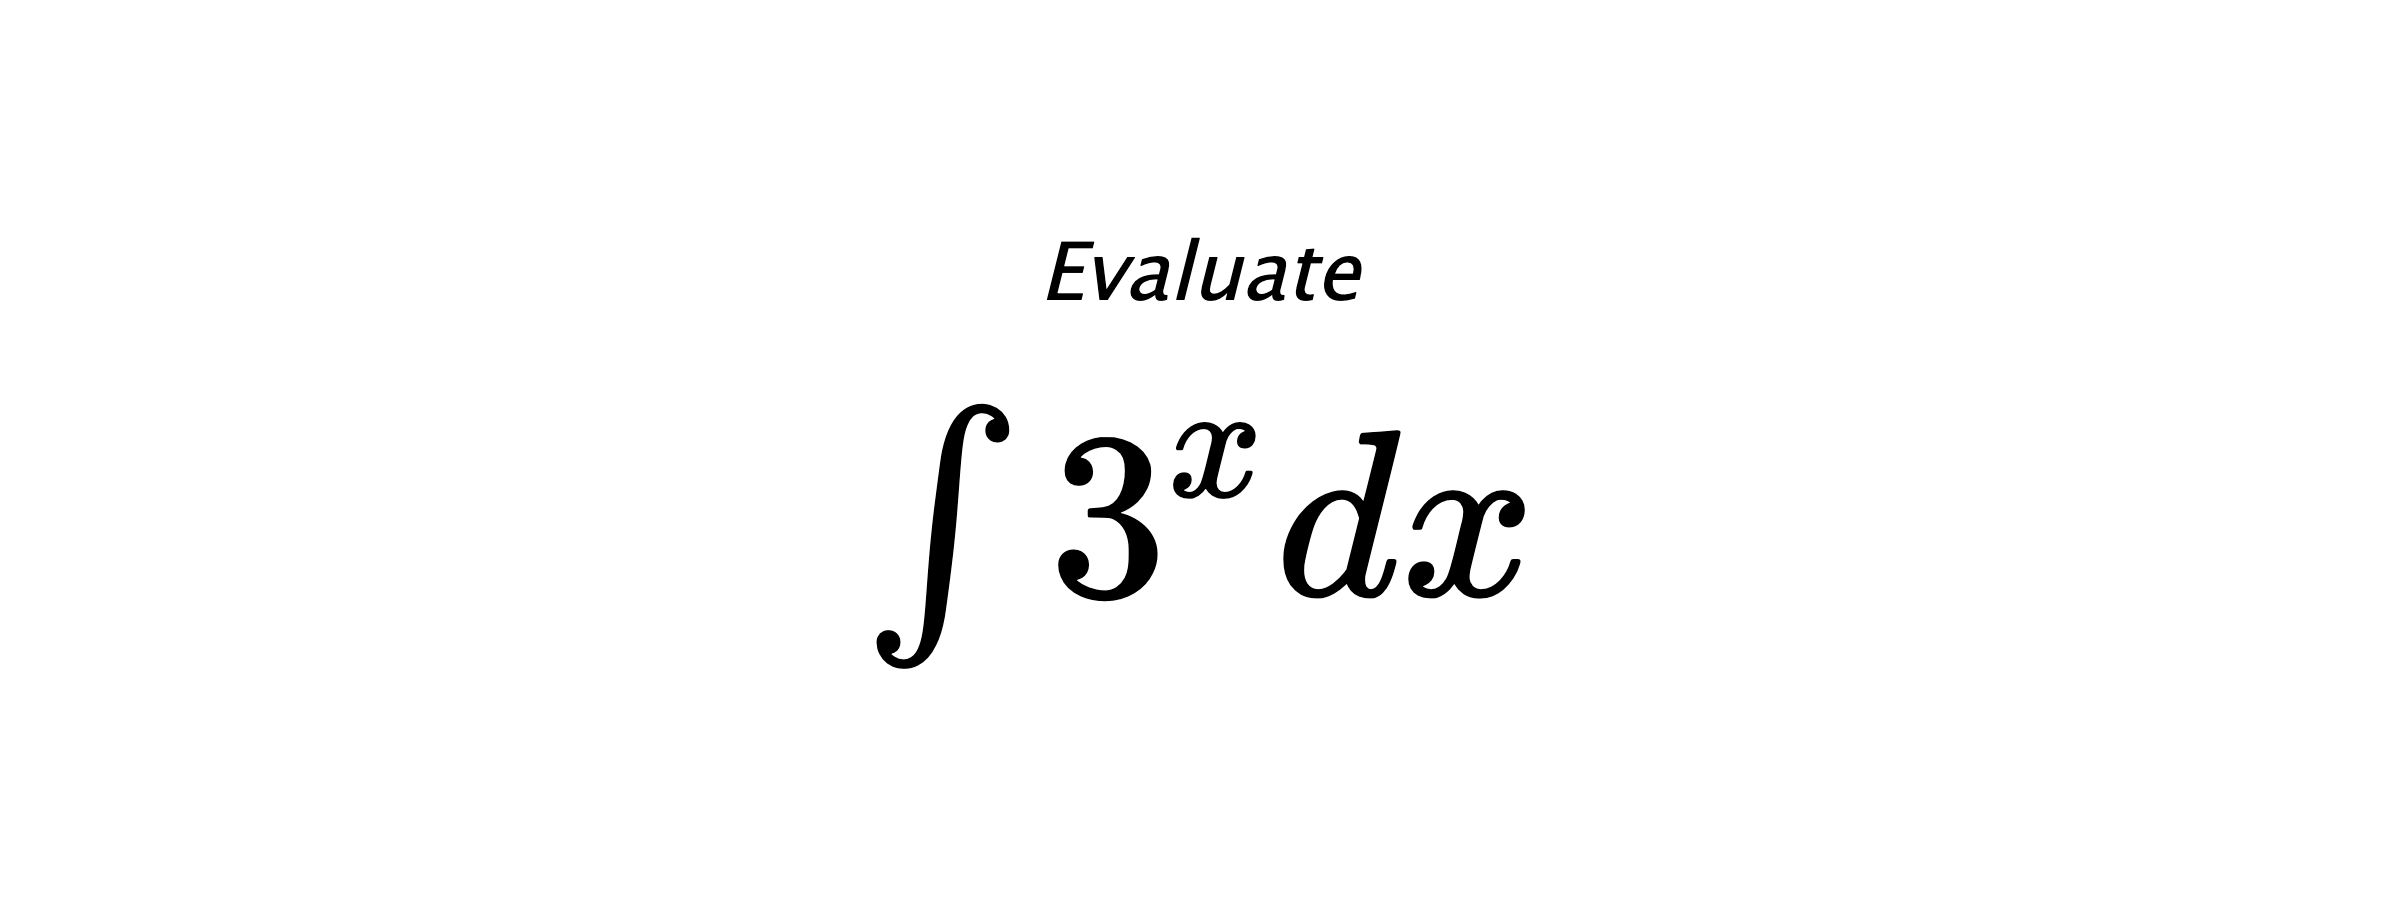 Evaluate $ \int 3^xdx $